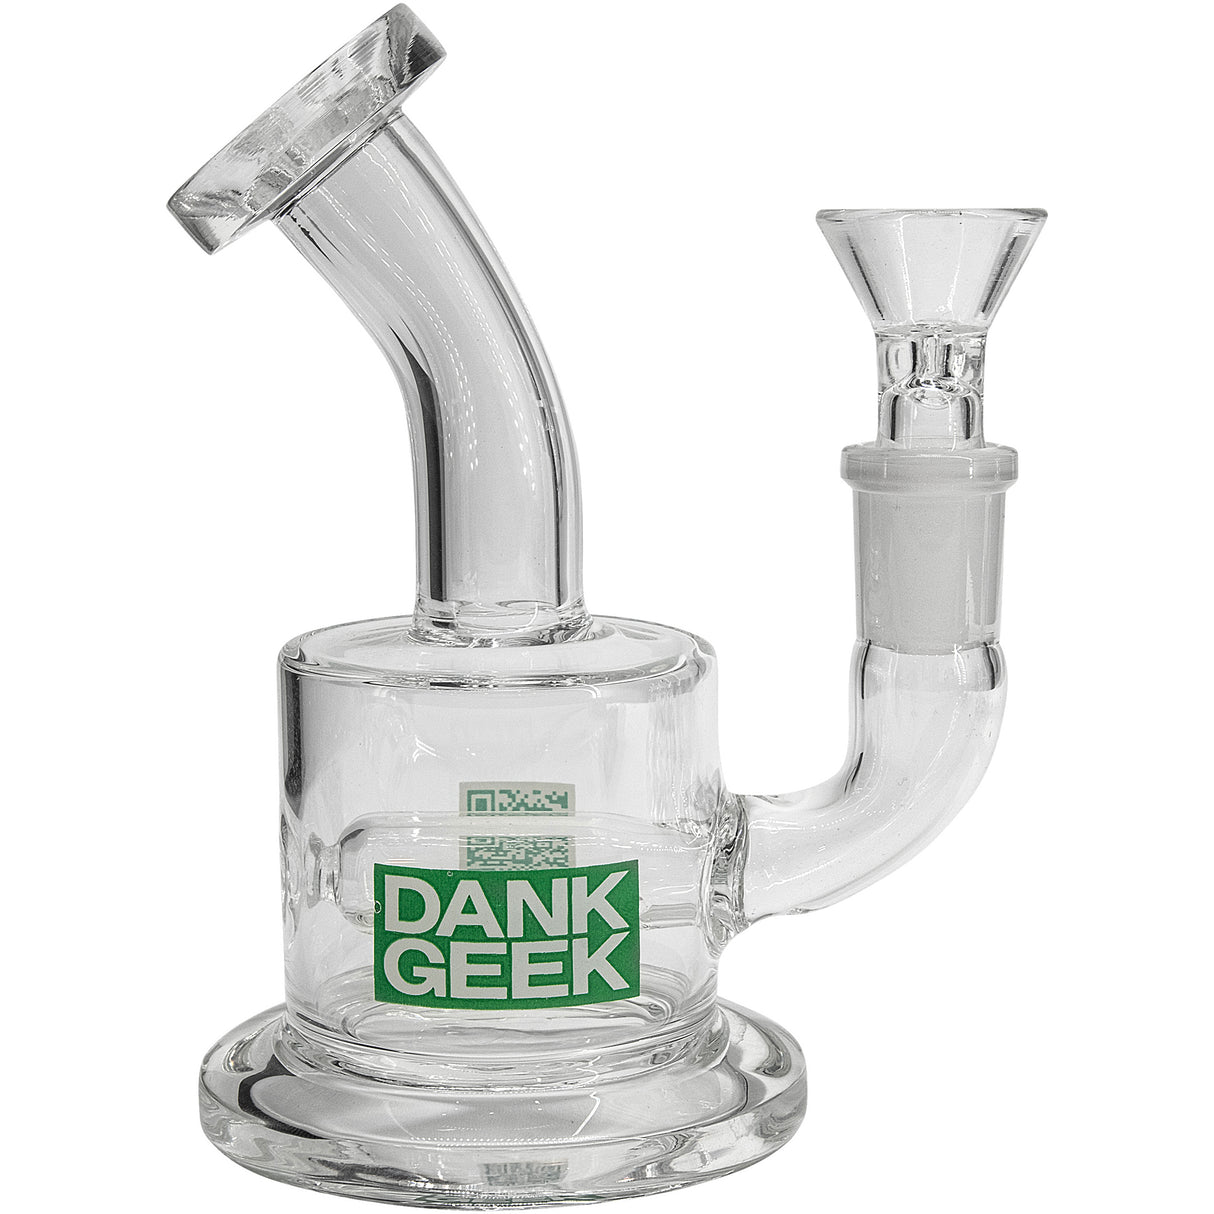 DankGeek Mini In-Line Banger Hanger Dab Rig with 14mm Female Joint and Borosilicate Glass